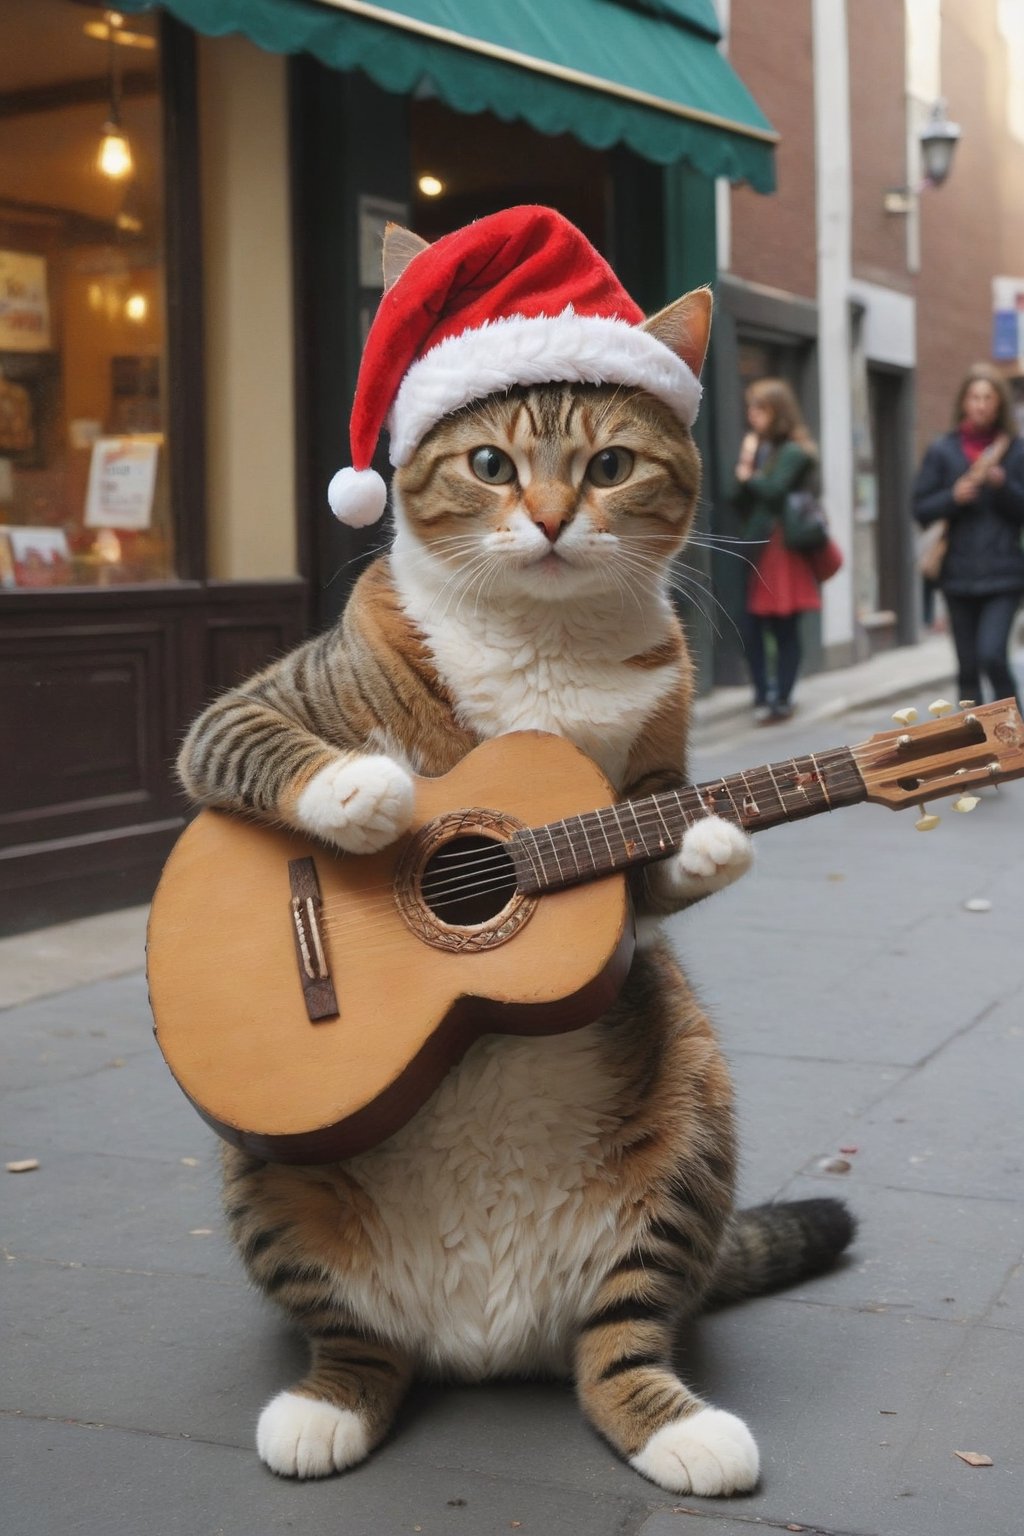 a cool and charismatic cat, donning a festive Christmas hat, BREAK, skillfully strumming a styr guitar while entertaining passersby on a lively street. The cat's playful expression and rhythmic paw movements exude a natural musical talent, captivating the audience with its melodic tunes. The Christmas hat adds a touch of holiday cheer to the scene, as onlookers pause to enjoy the impromptu street performance.